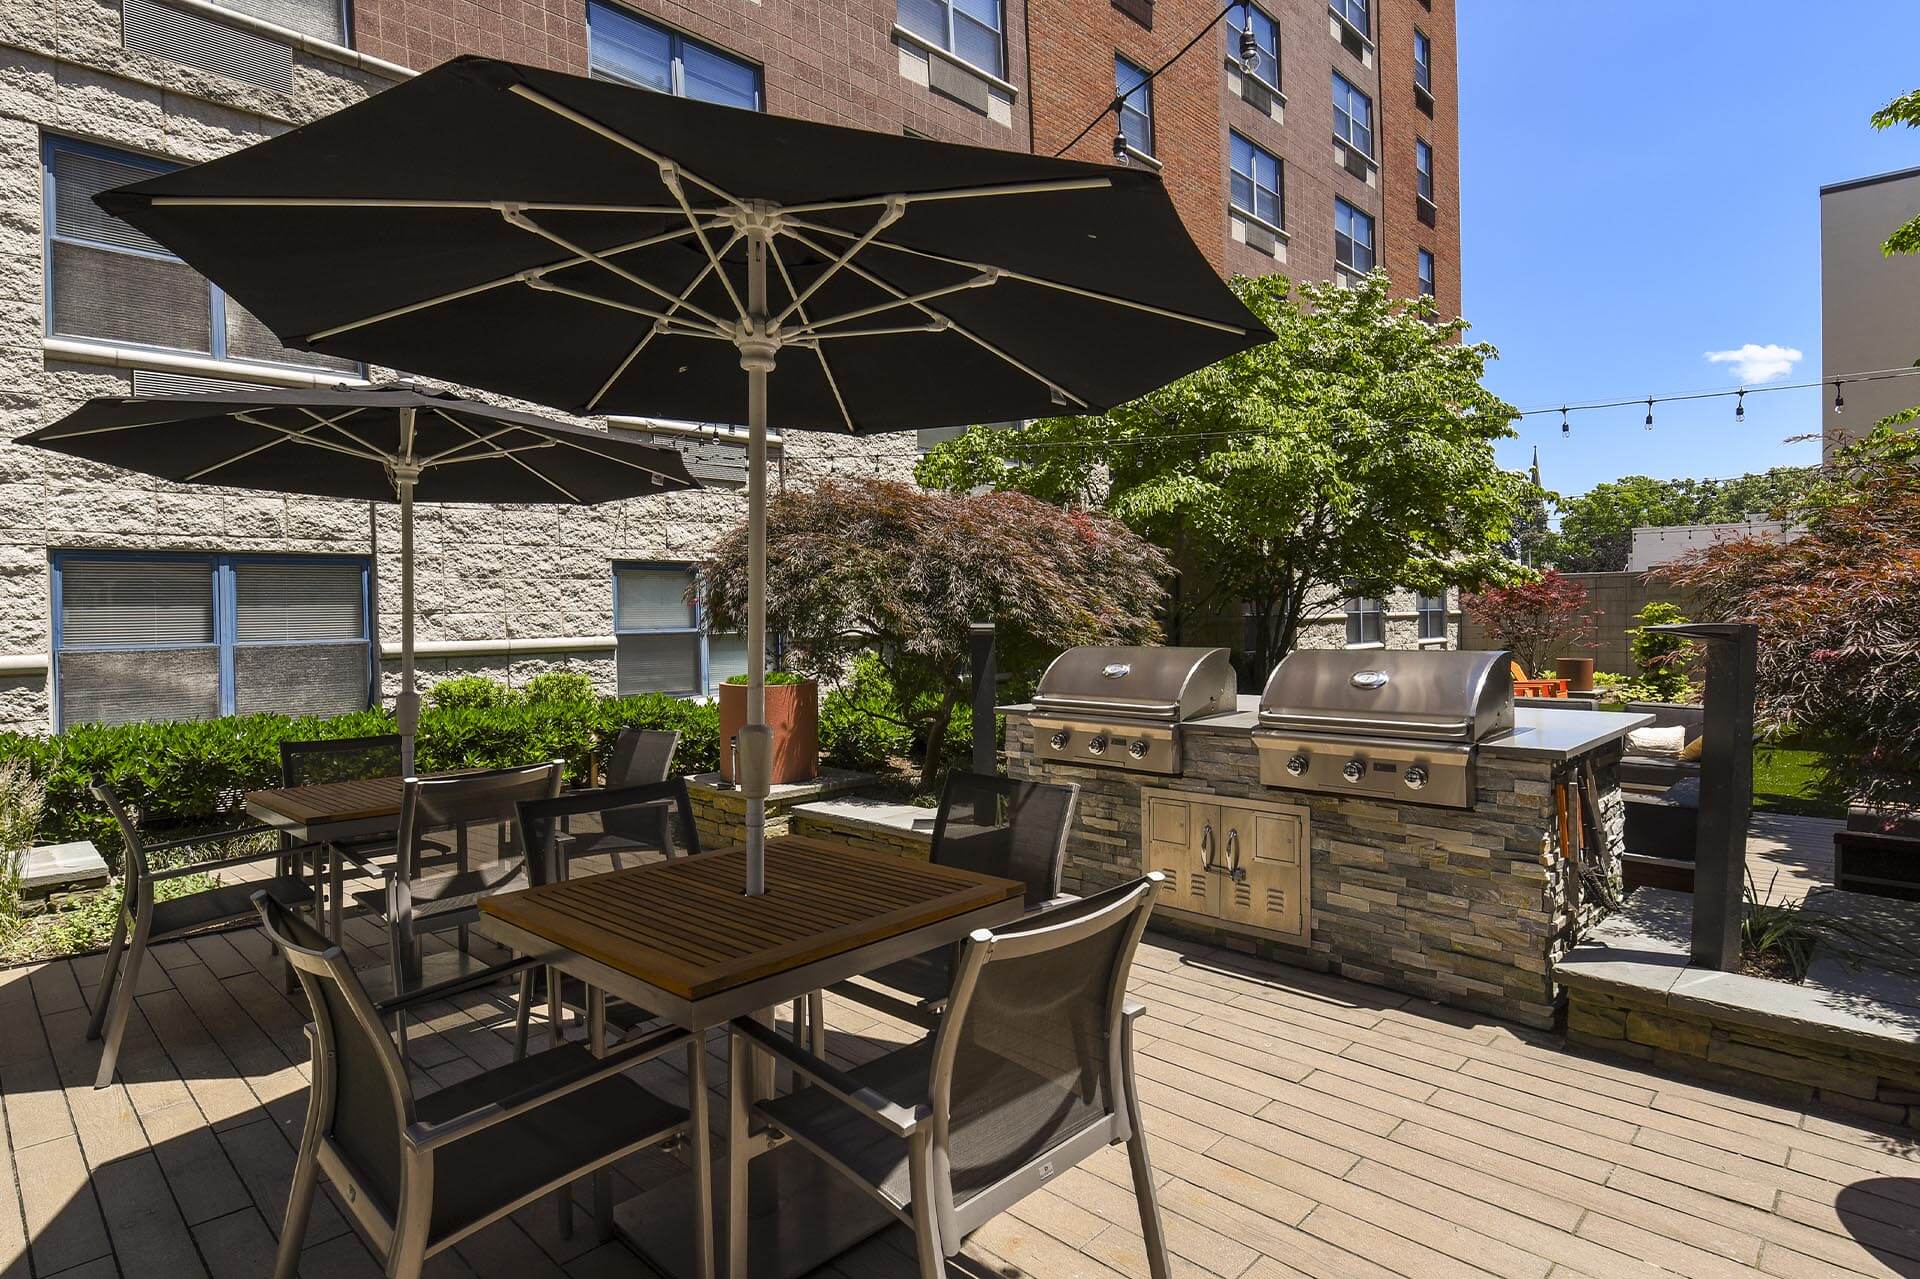 On site grill and tables at The Monroe, Morristown, New Jersey